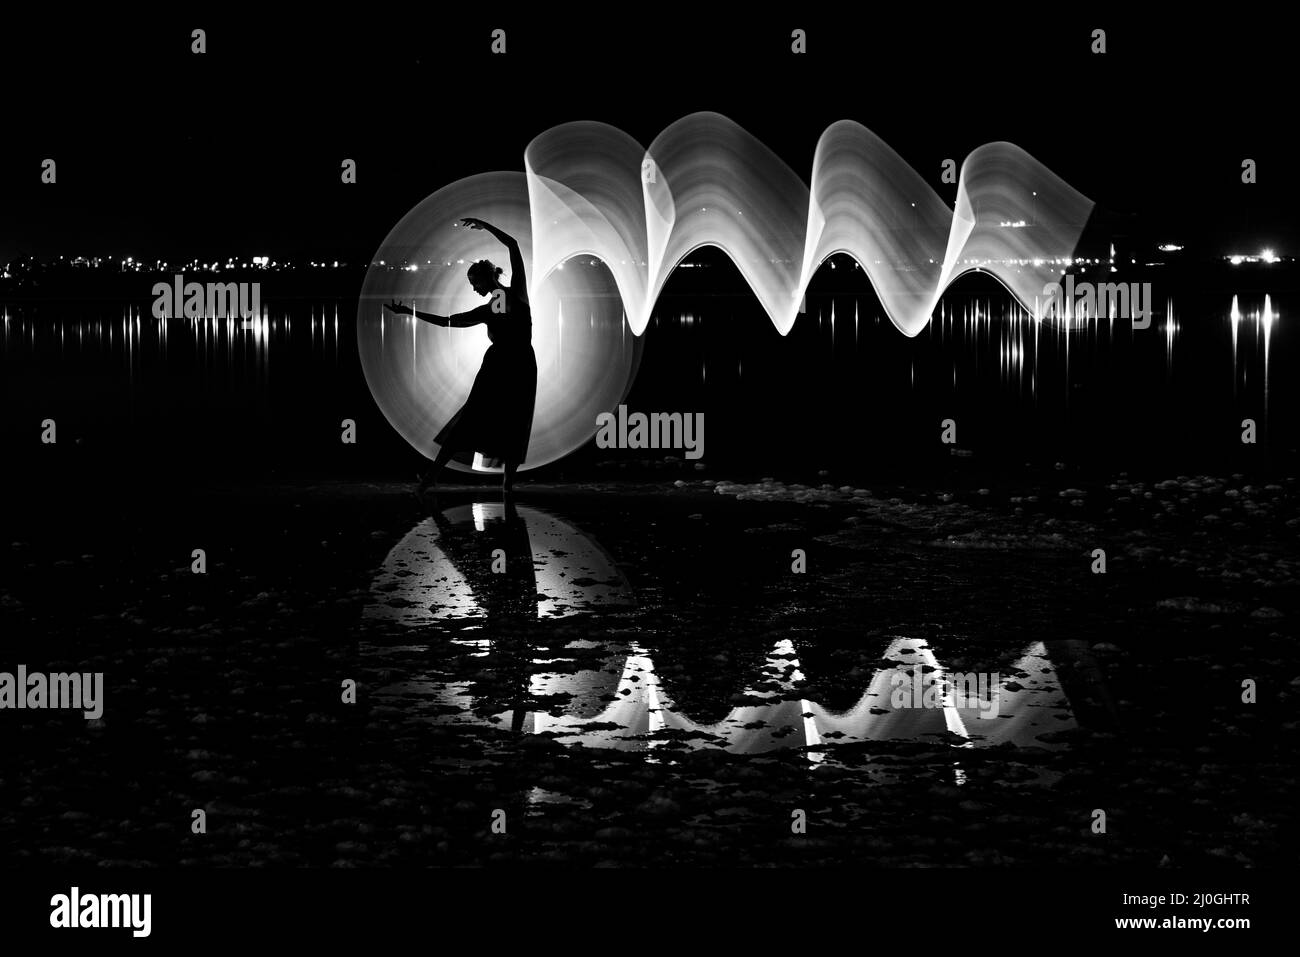 Silhouette of a woman dancing outdoors at a lake with painting light and reflections on the water. Stock Photo